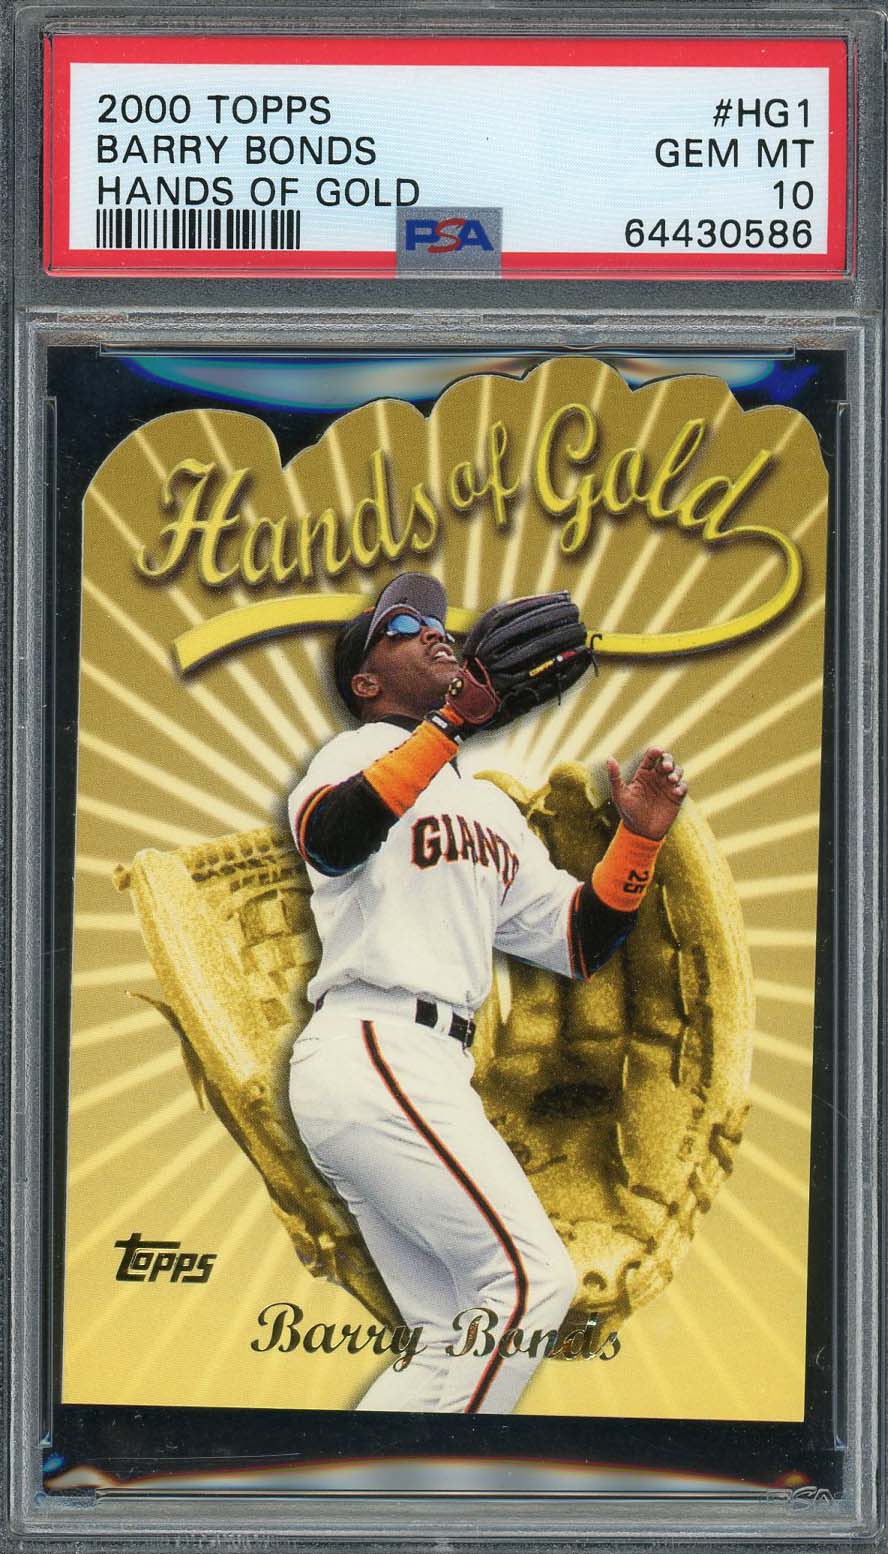 Upper Deck, Other, Barry Bonds Game Used Jersey Memorabilia Card